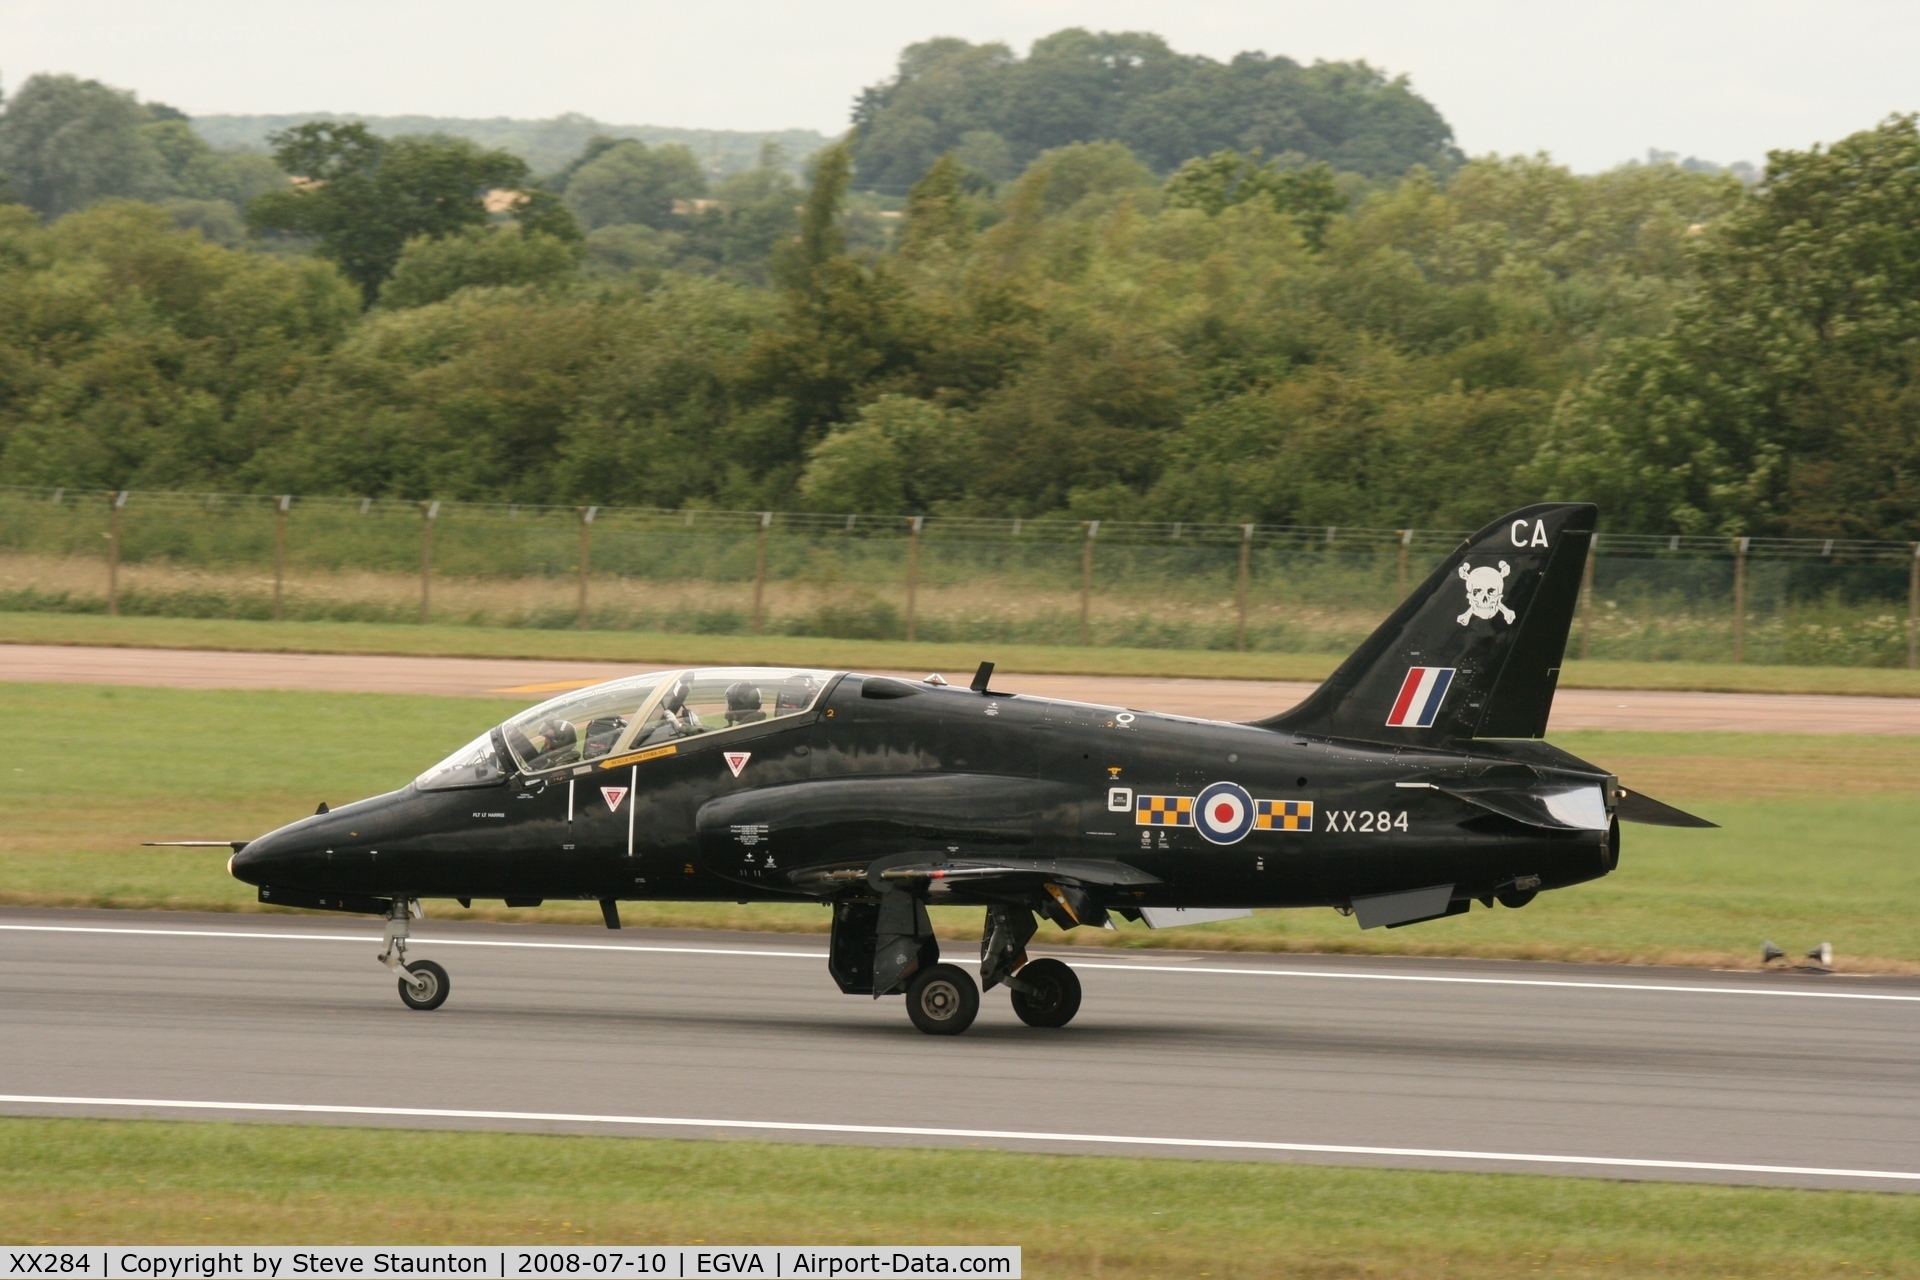 XX284, 1979 Hawker Siddeley Hawk T.1A C/N 110/312109, Taken at the Royal International Air Tattoo 2008 during arrivals and departures (show days cancelled due to bad weather)